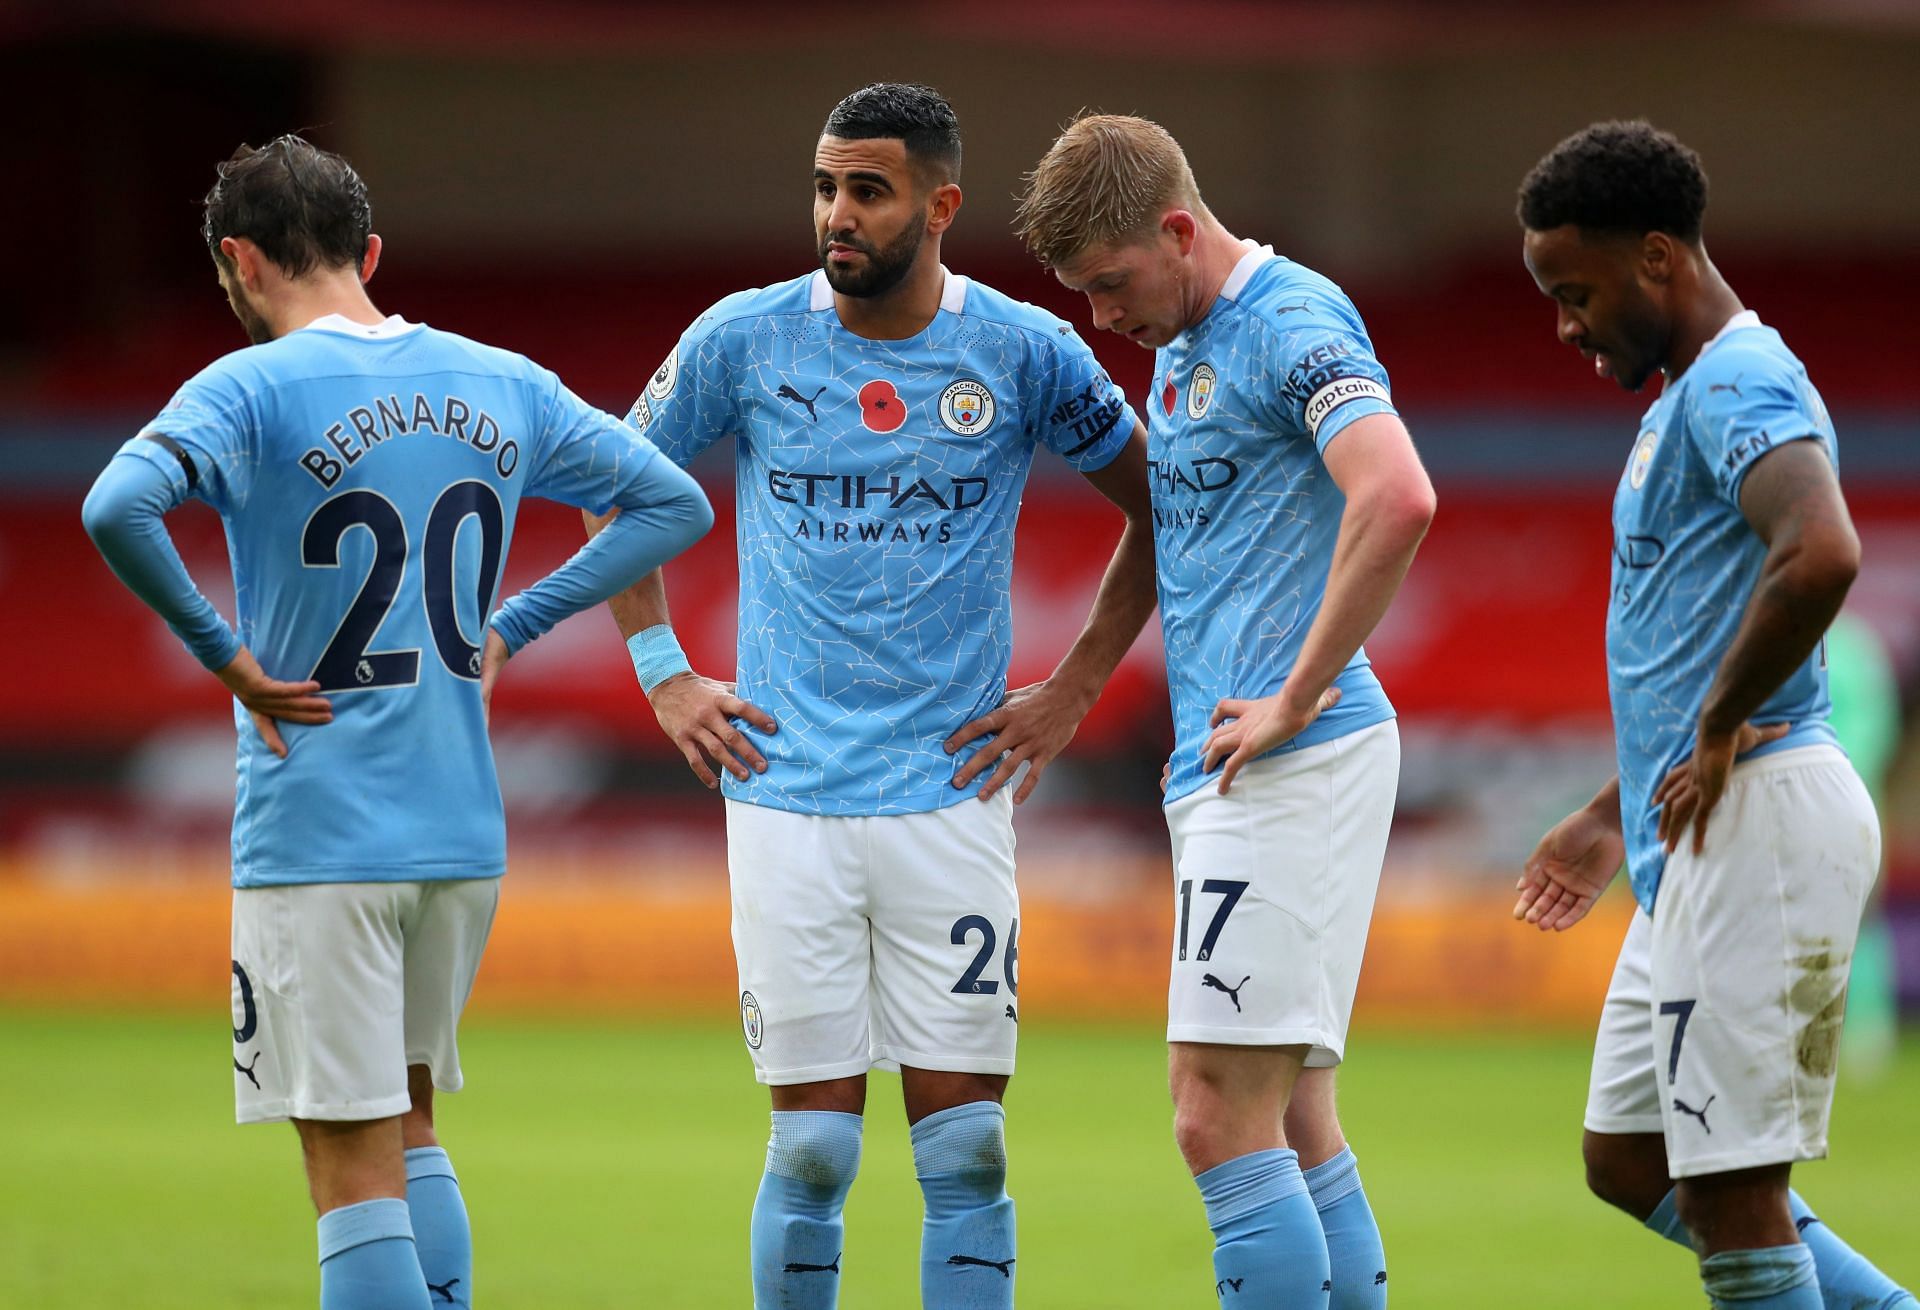 Manchester City rely on their collective ability to score goals rather than one star forward